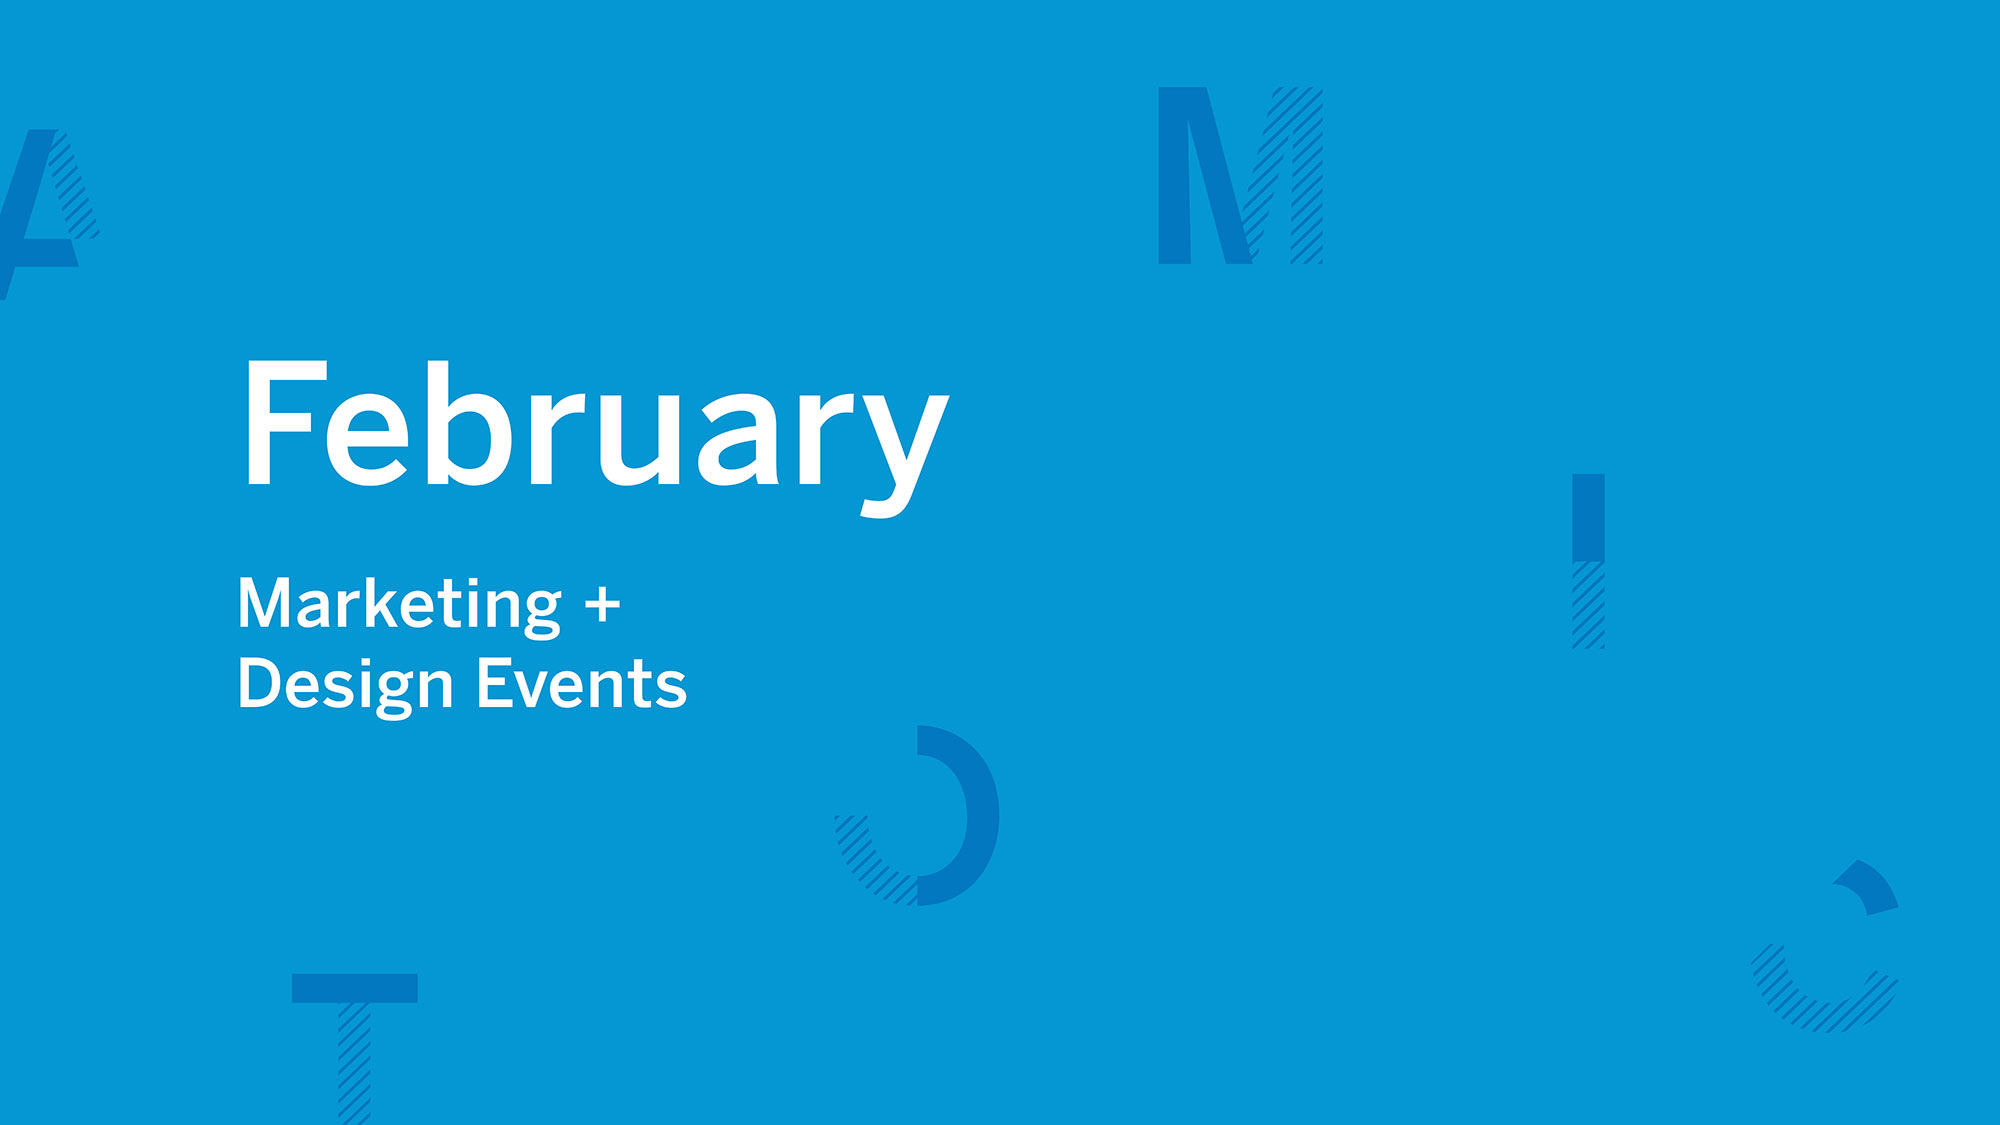 February 2019 Marketing-Design events in St. louis